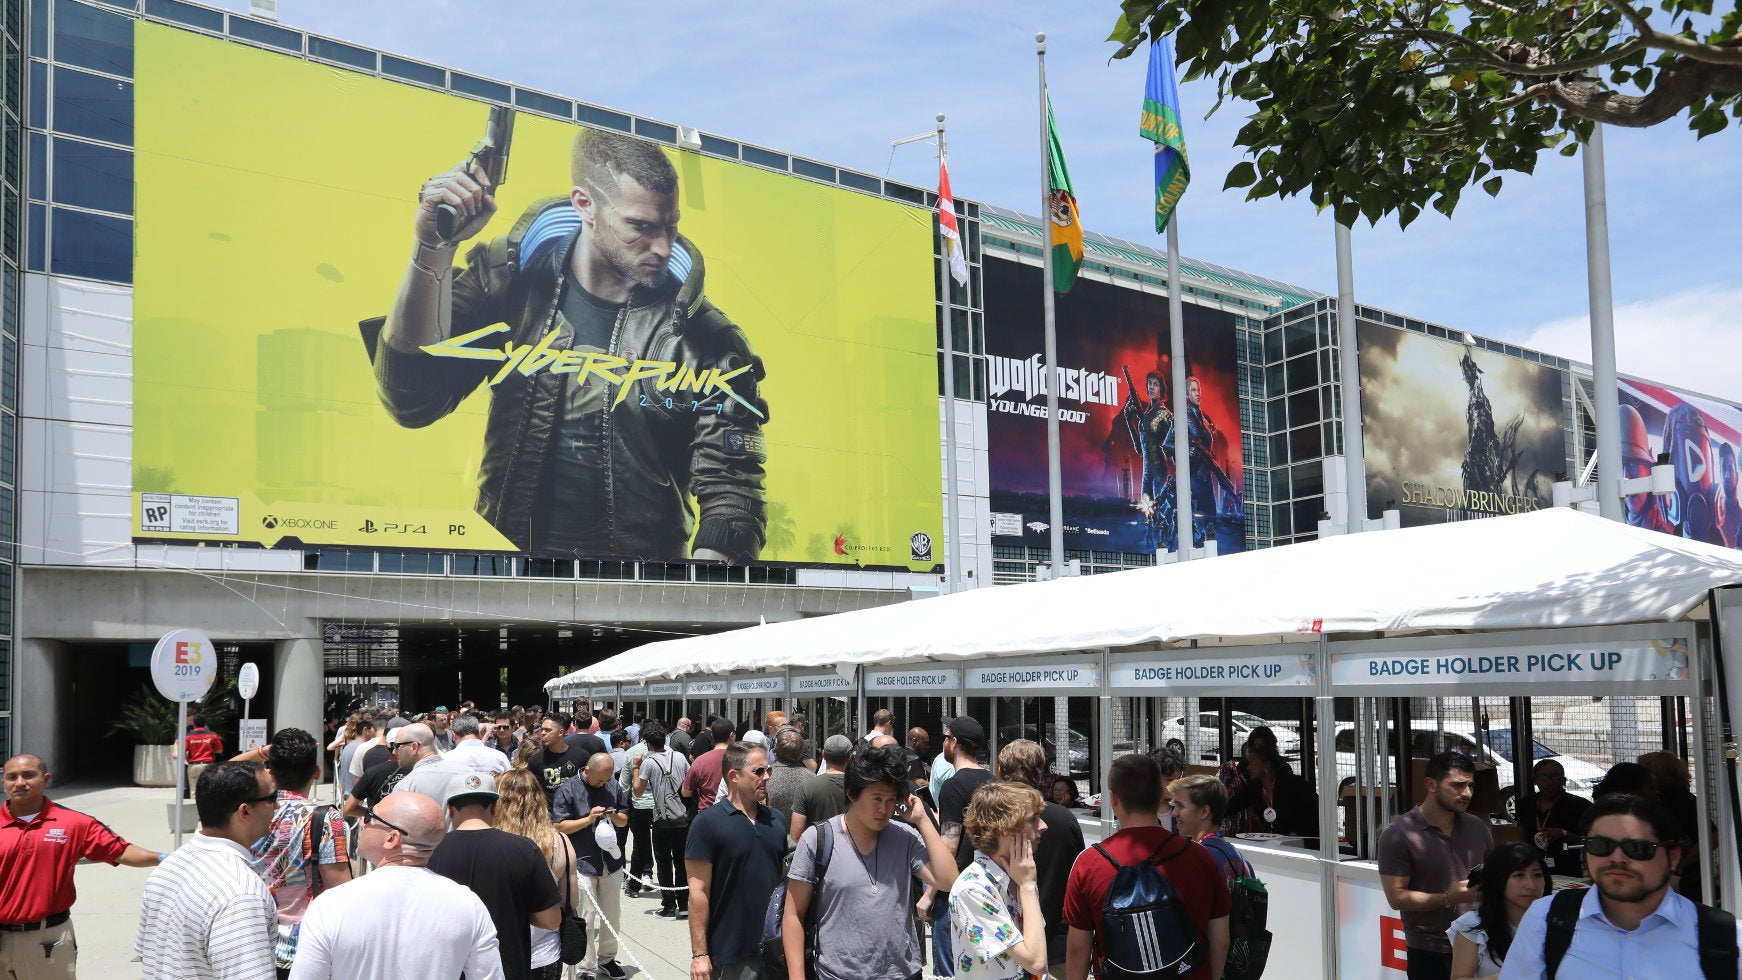 Image for E3 2020 is going ahead as planned, organisers say